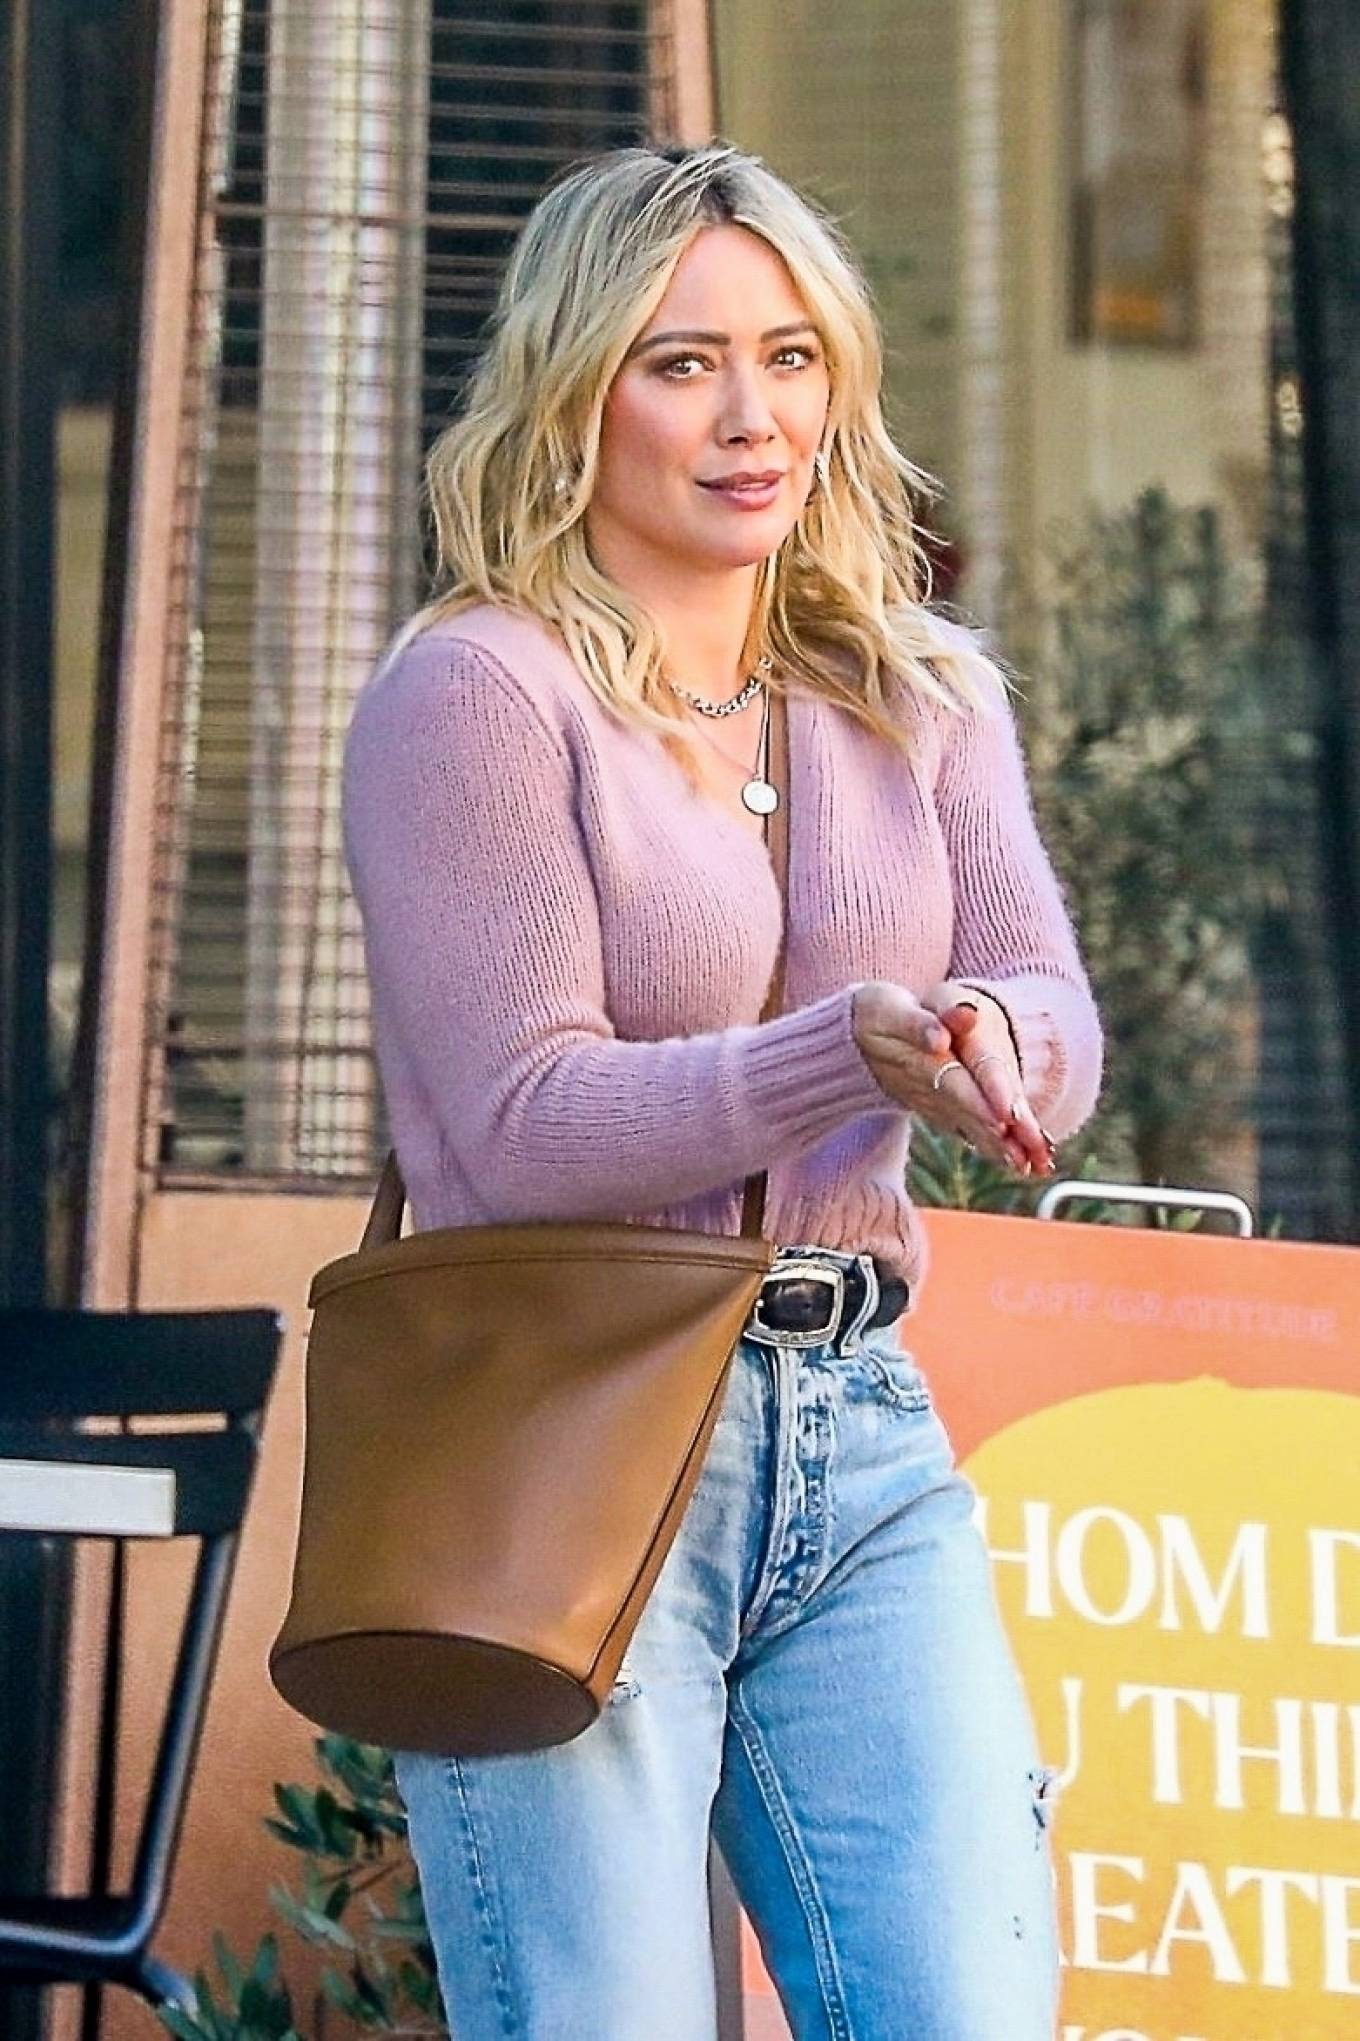 Hilary Duff - Seen at Cafe Gratitude in LA after filming at Paramount Studious